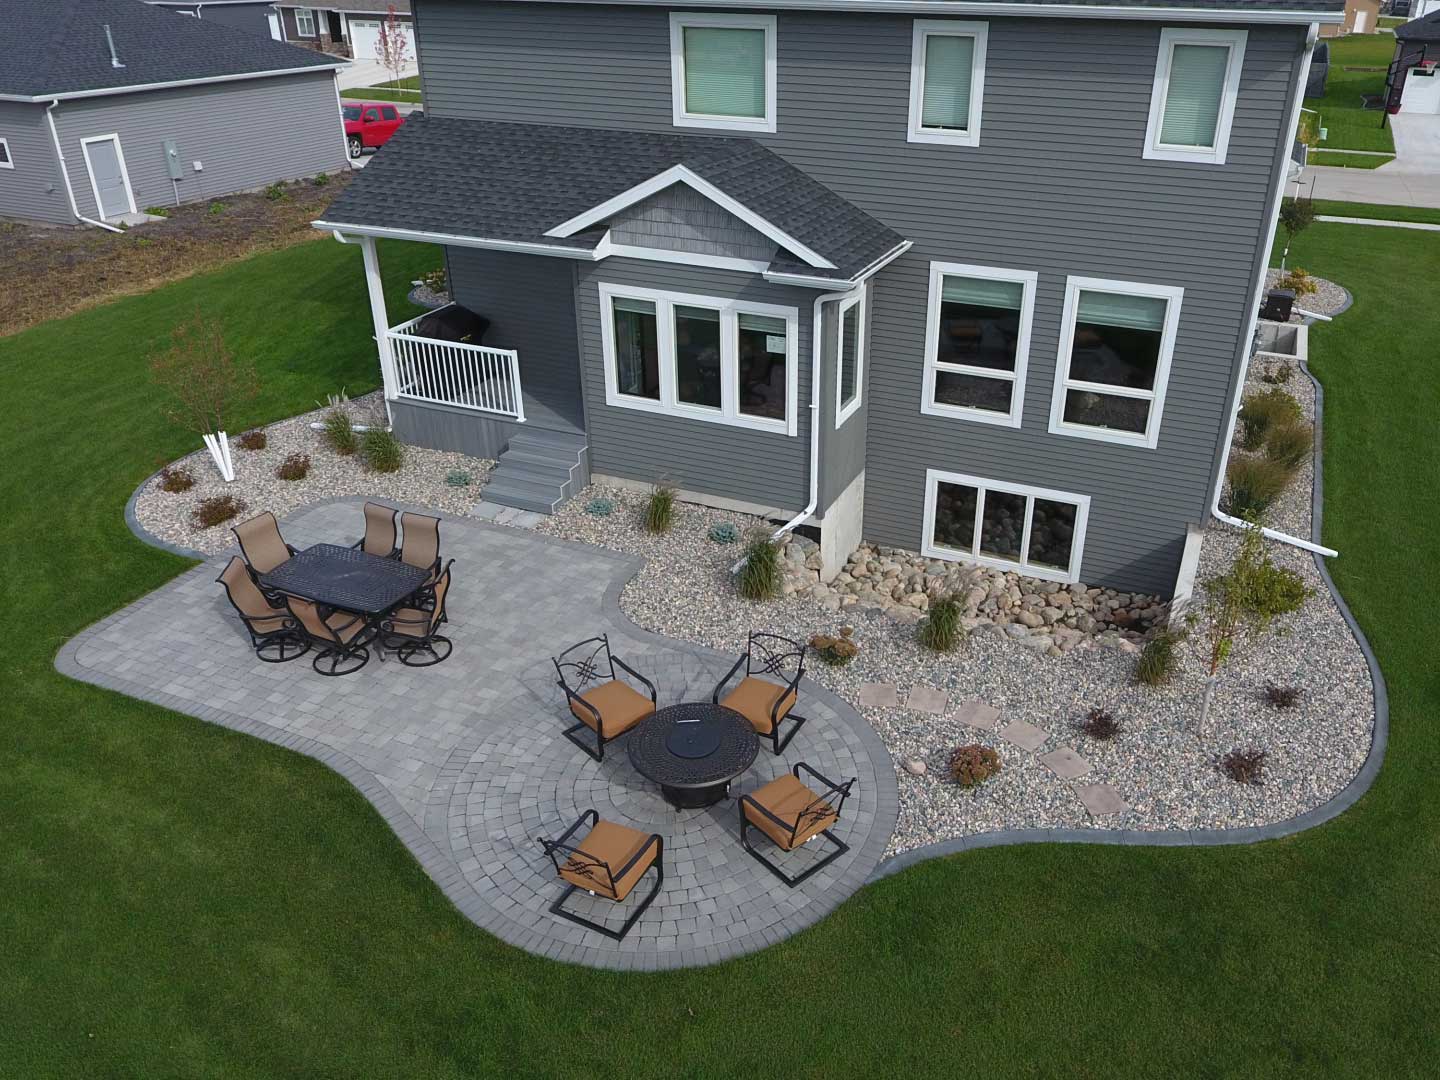 Gray paver patio with surrounding rock landscaping